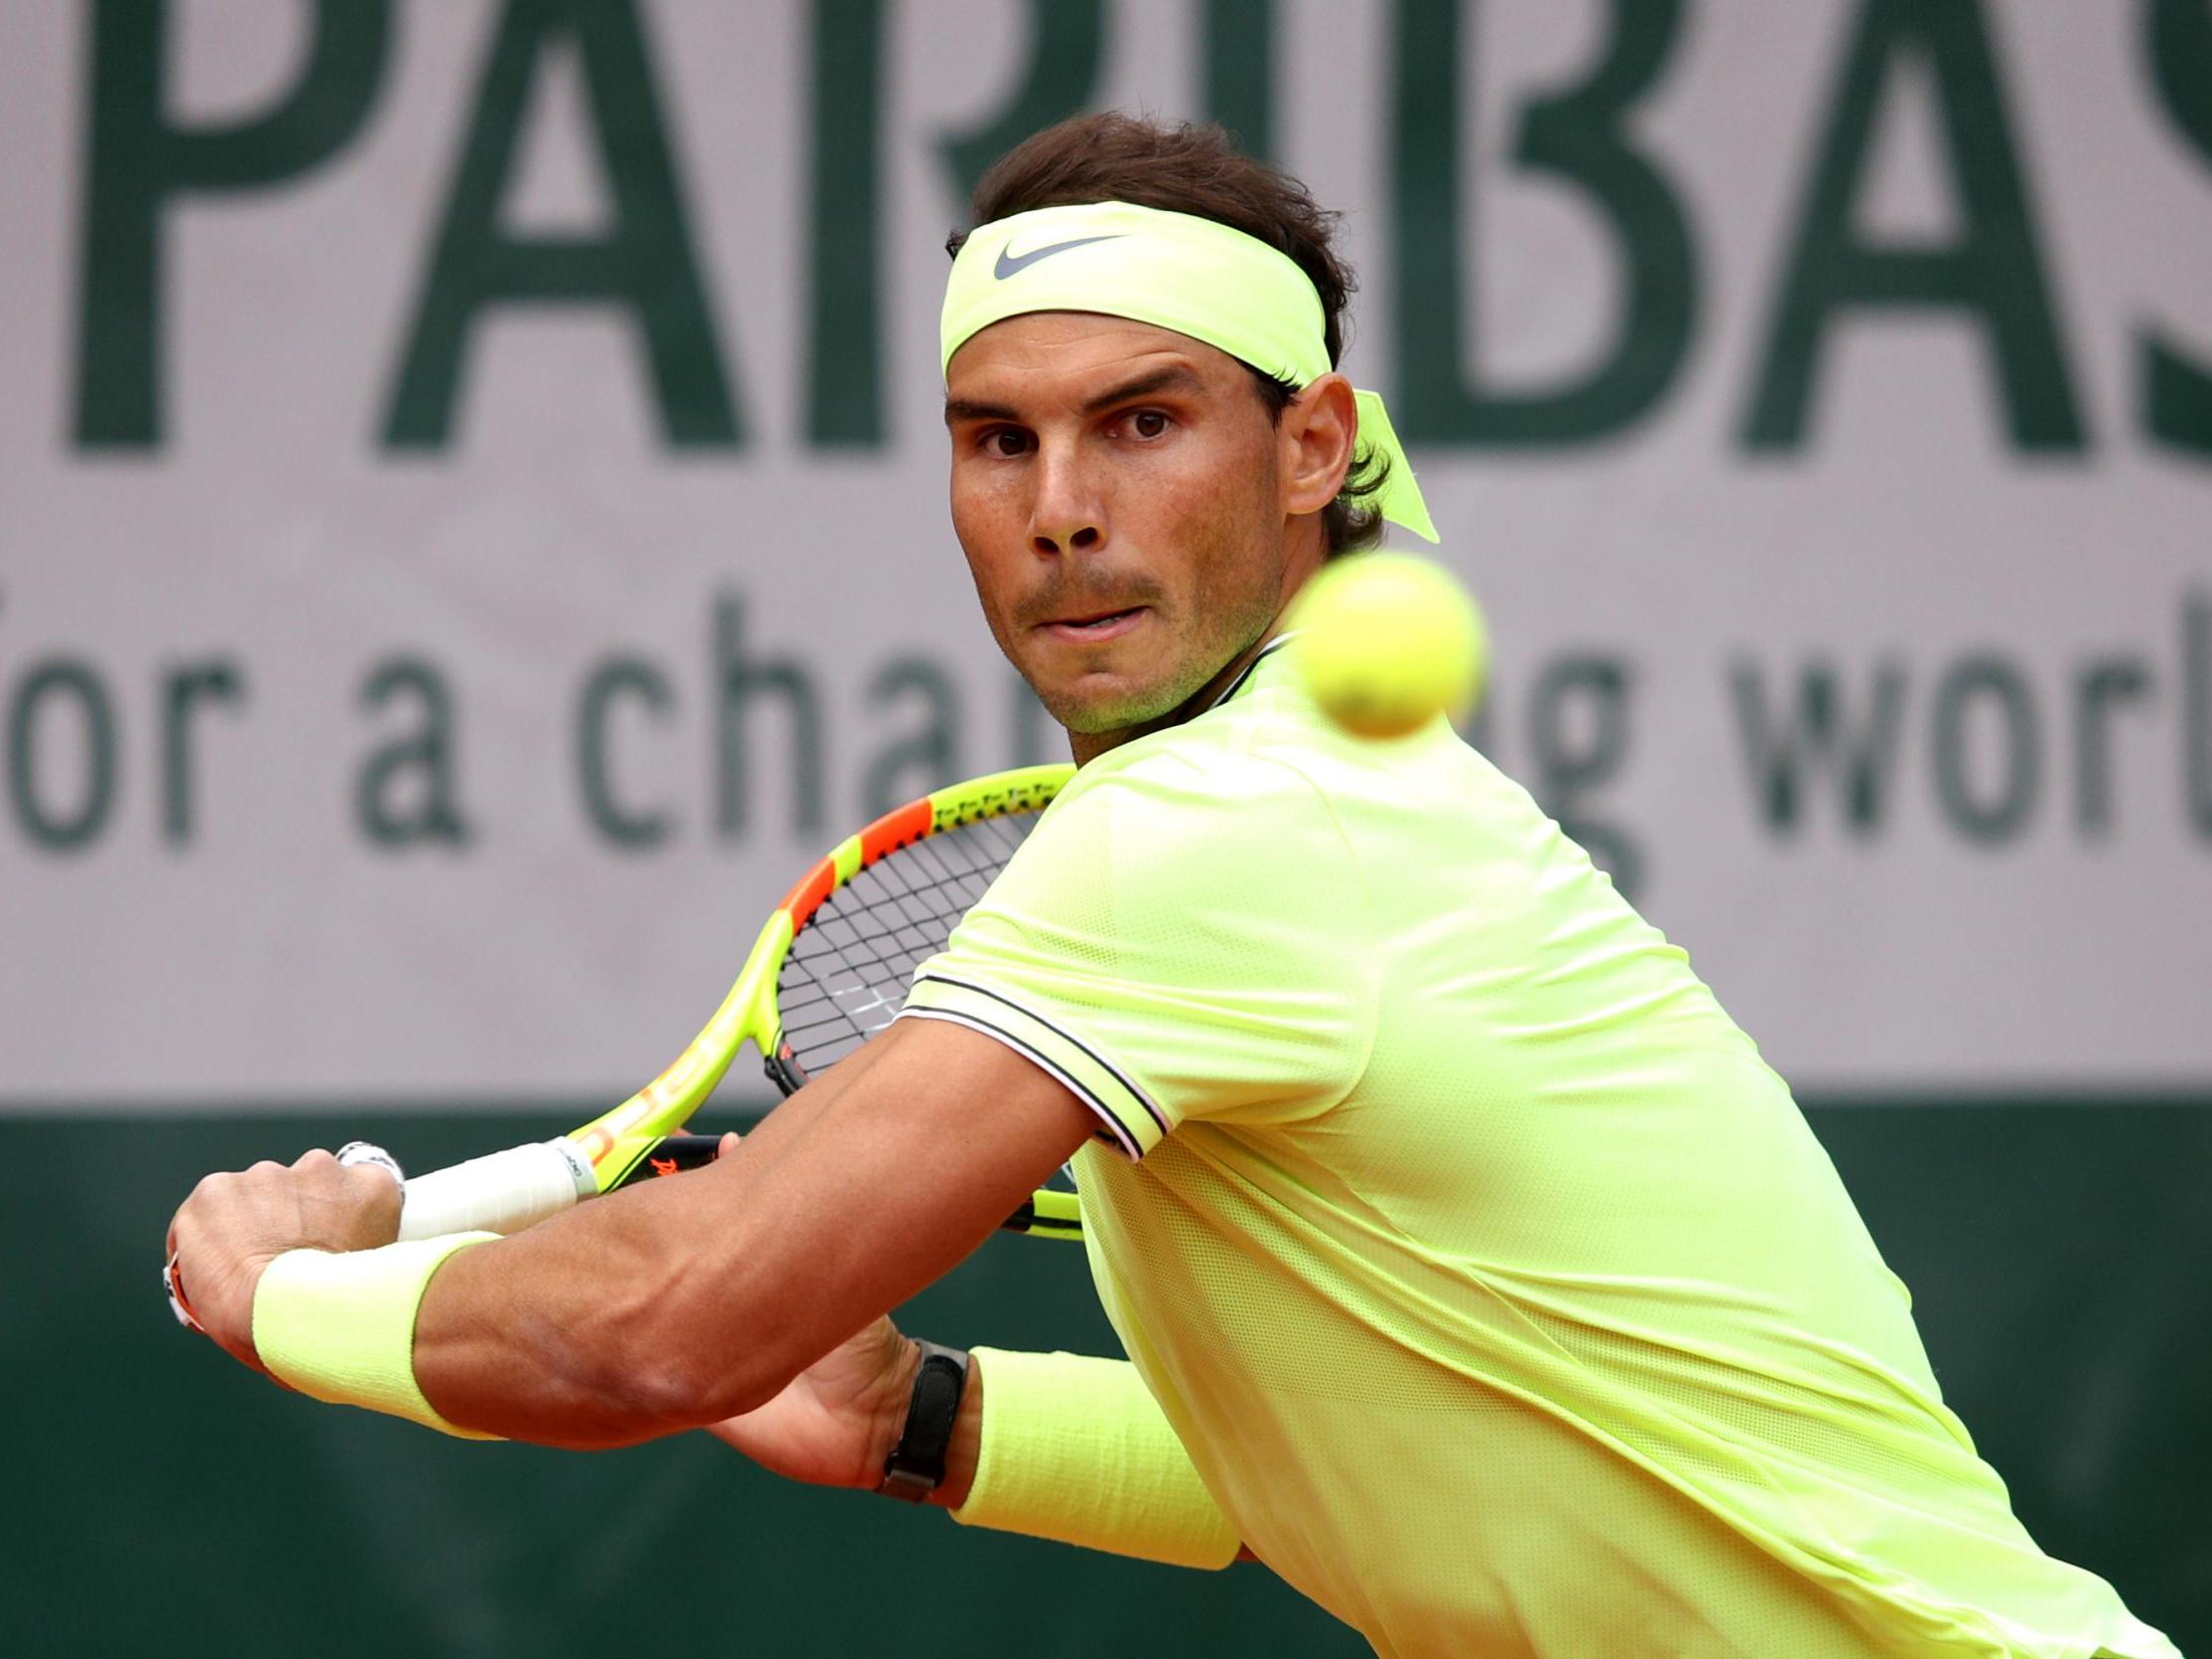 French Open results: Rafael Nadal extends Roland Garros record as Novak Djokovic wins | The Independent | The Independent